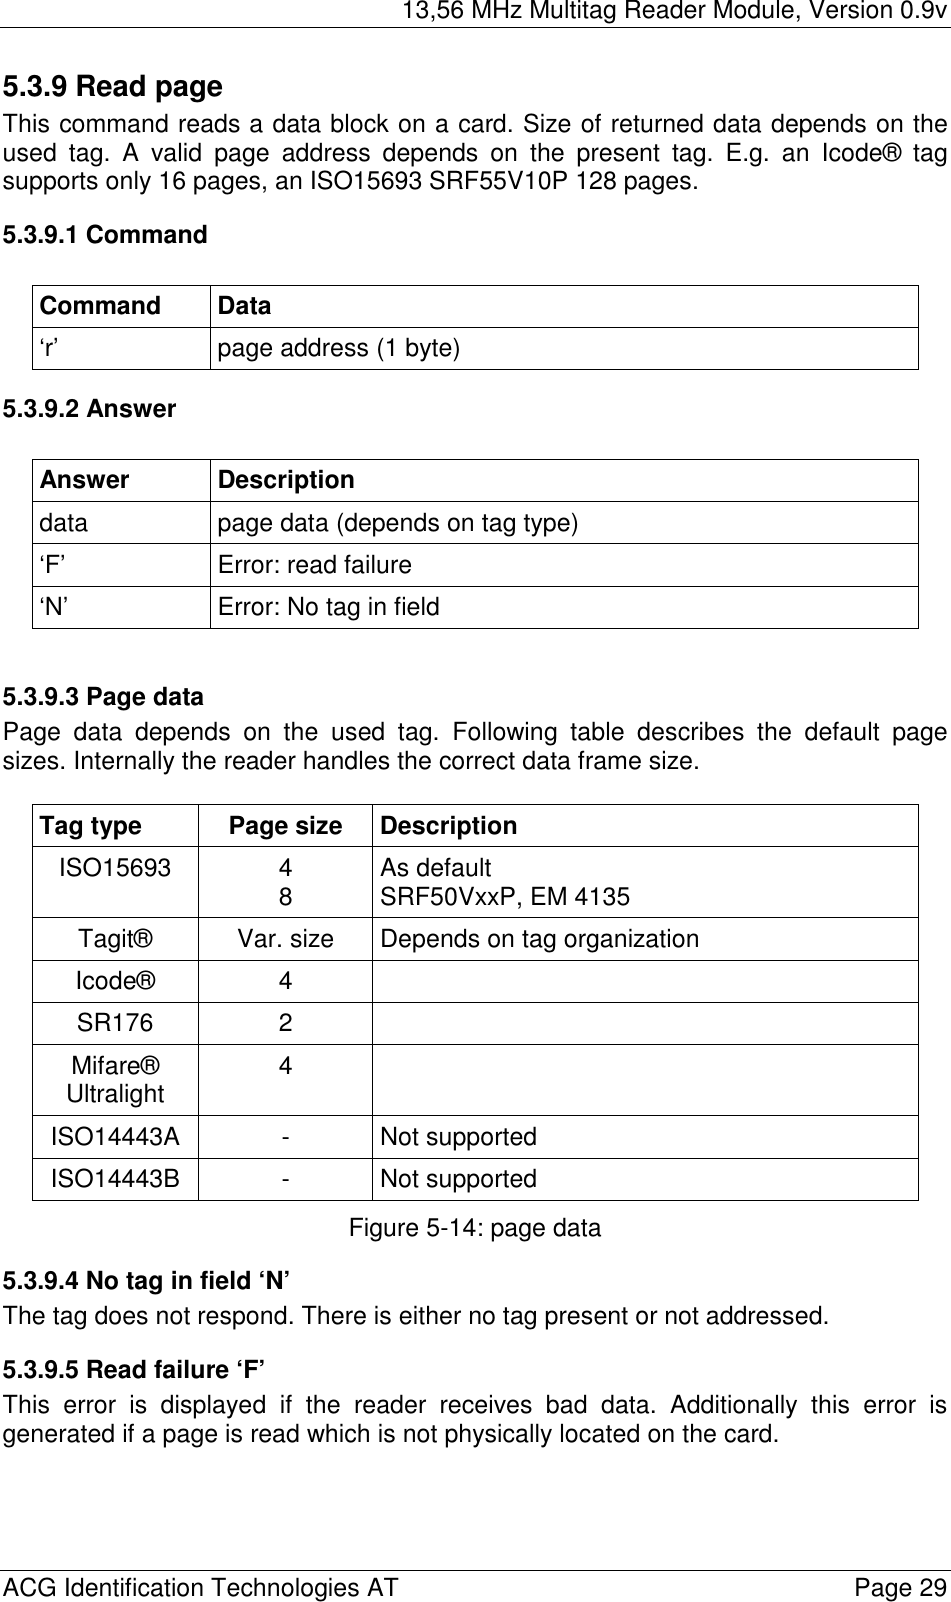 13,56 MHz Multitag Reader Module, Version 0.9v  ACG Identification Technologies AT    Page 29 5.3.9 Read page This command reads a data block on a card. Size of returned data depends on the used tag. A valid page address depends on the present tag. E.g. an Icode® tag supports only 16 pages, an ISO15693 SRF55V10P 128 pages. 5.3.9.1 Command  Command Data ‘r’  page address (1 byte) 5.3.9.2 Answer  Answer Description data  page data (depends on tag type) ‘F’ Error: read failure ‘N’  Error: No tag in field  5.3.9.3 Page data Page data depends on the used tag. Following table describes the default page sizes. Internally the reader handles the correct data frame size.  Tag type  Page size  Description ISO15693 4 8  As default SRF50VxxP, EM 4135 Tagit®  Var. size  Depends on tag organization Icode® 4  SR176 2  Mifare® Ultralight  4  ISO14443A - Not supported ISO14443B - Not supported Figure 5-14: page data 5.3.9.4 No tag in field ‘N’ The tag does not respond. There is either no tag present or not addressed. 5.3.9.5 Read failure ‘F’ This error is displayed if the reader receives bad data. Additionally this error is generated if a page is read which is not physically located on the card. 